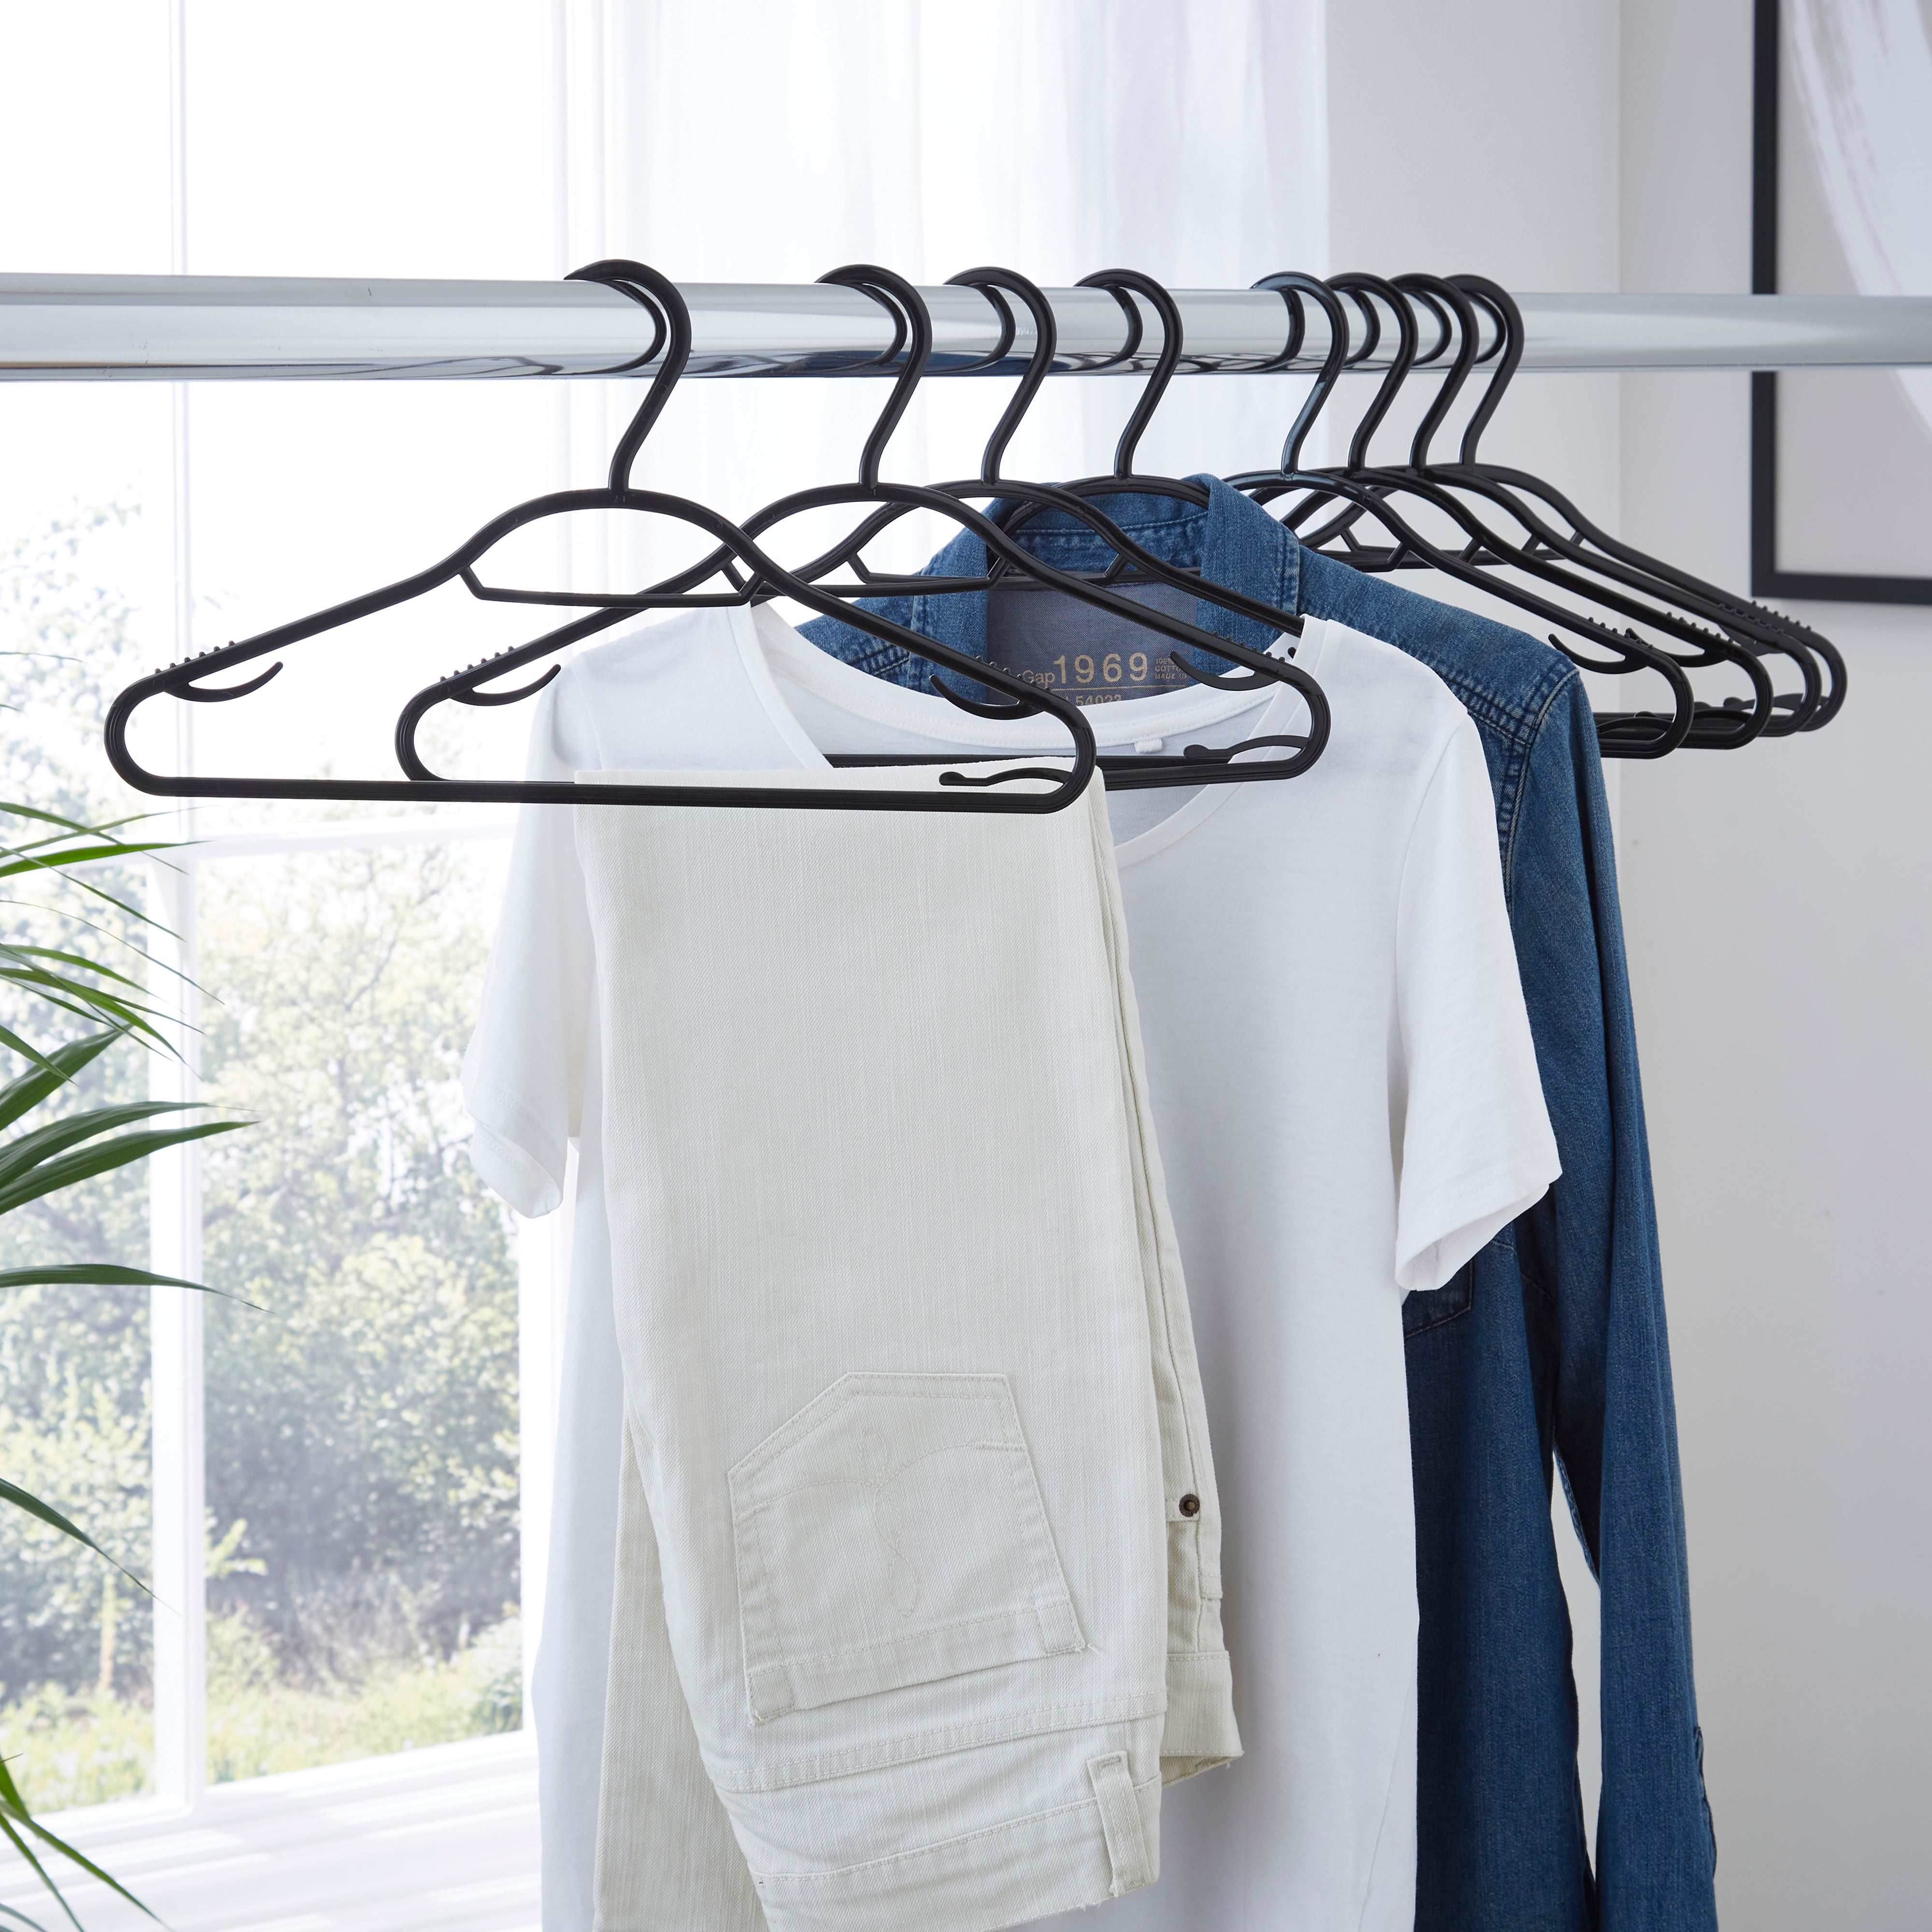 How to stop clothes from slipping off hangers?